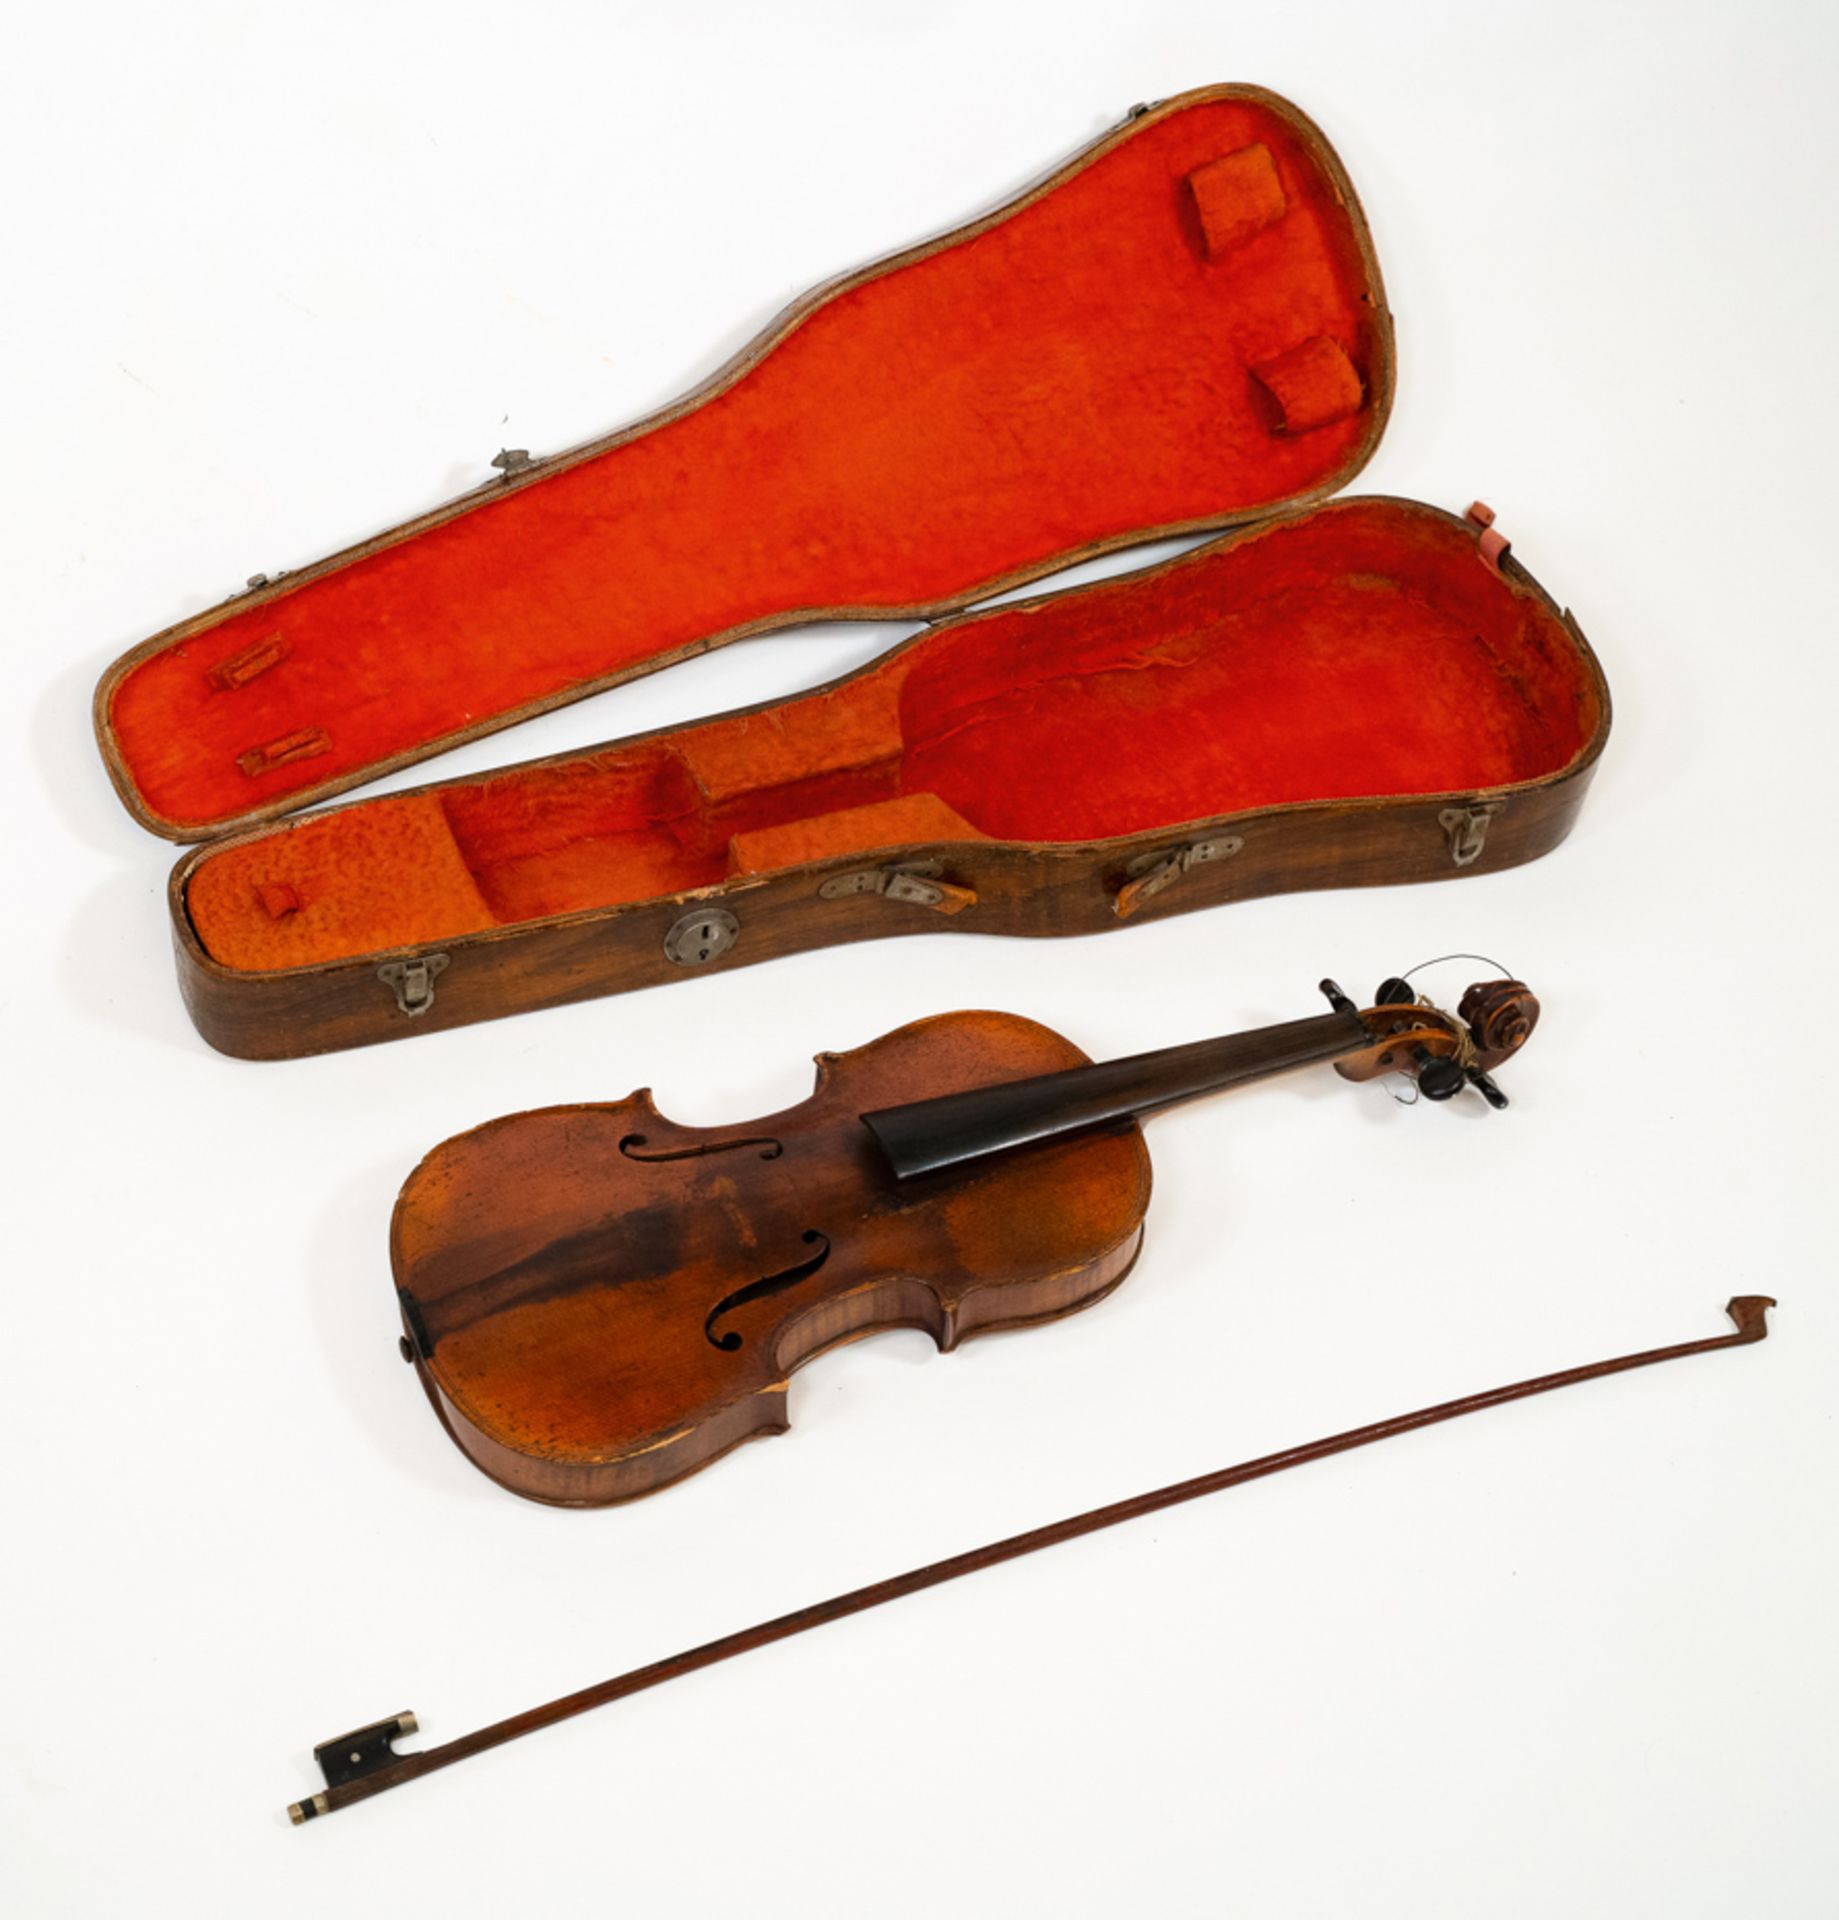 UNSIGNED VIOLIN WITH BOW IN HISTORICAL WOODEN CASE